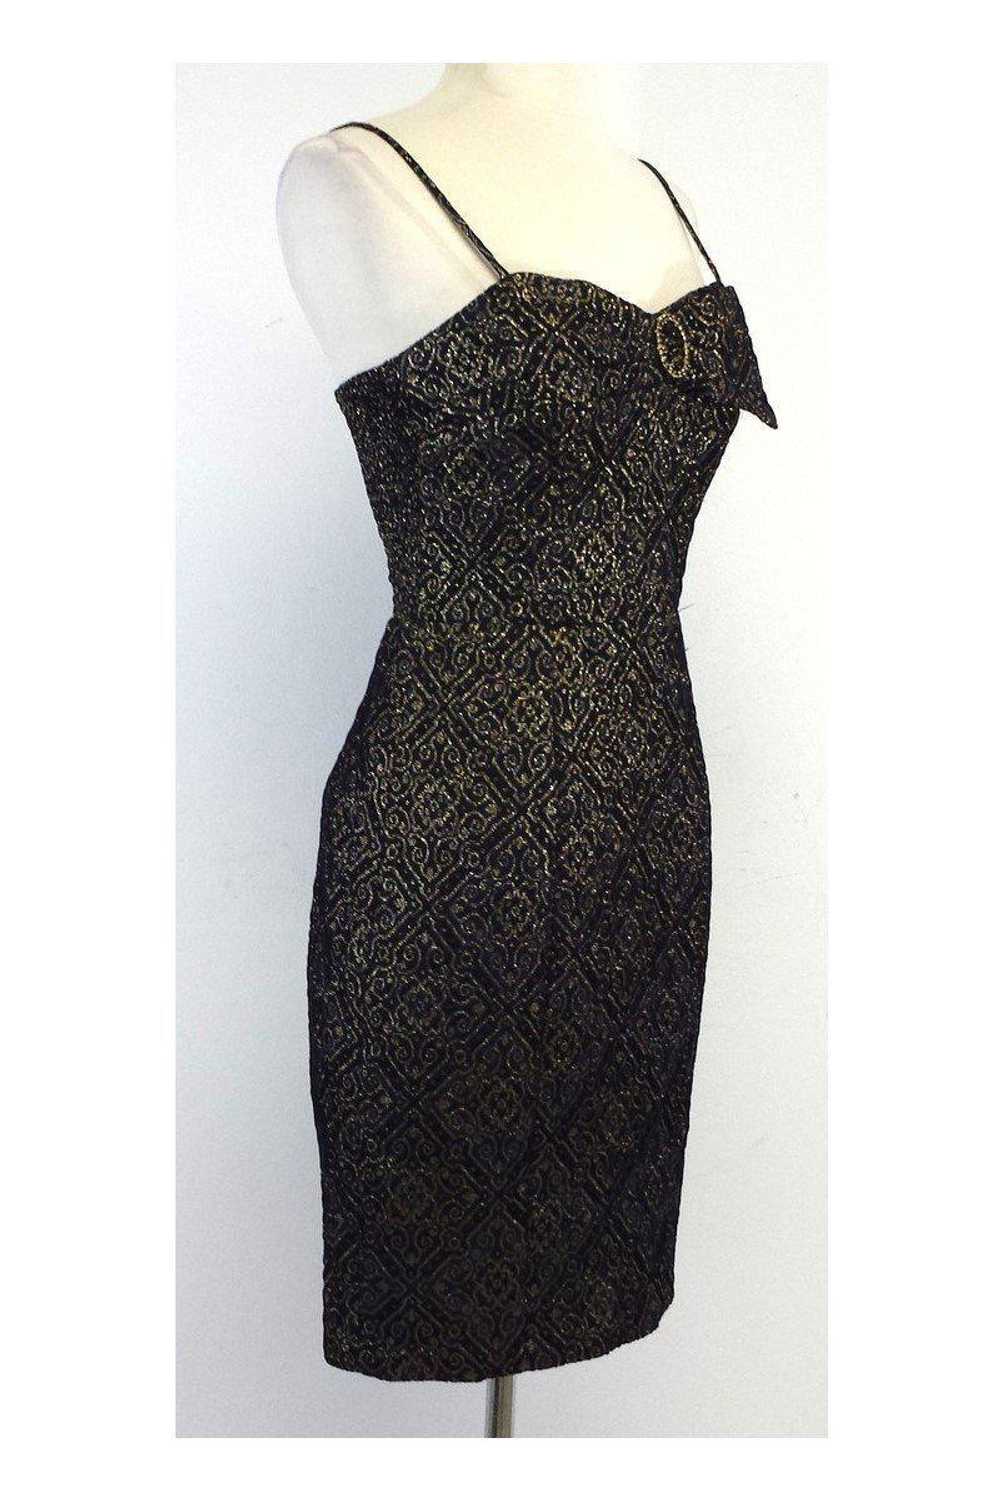 Betsey Johnson - Embroidered Bodycon Dress Sz 2 - image 2